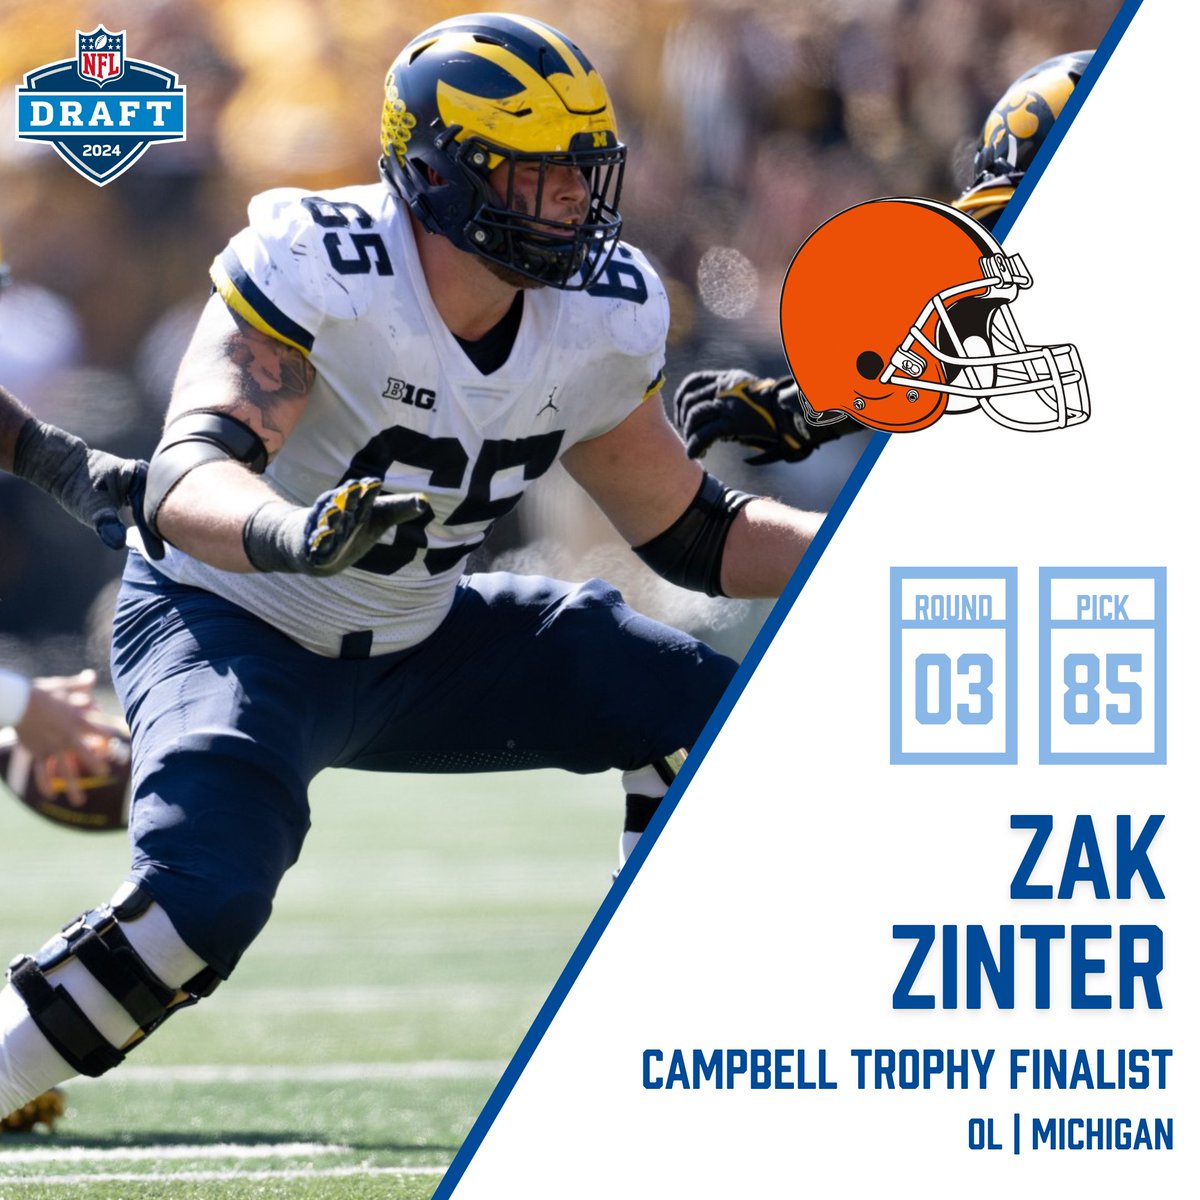 From maize and blue to brown and orange, 2023 #CampbellTrophy finalist Zak Zinter is now a Cleveland Brown!